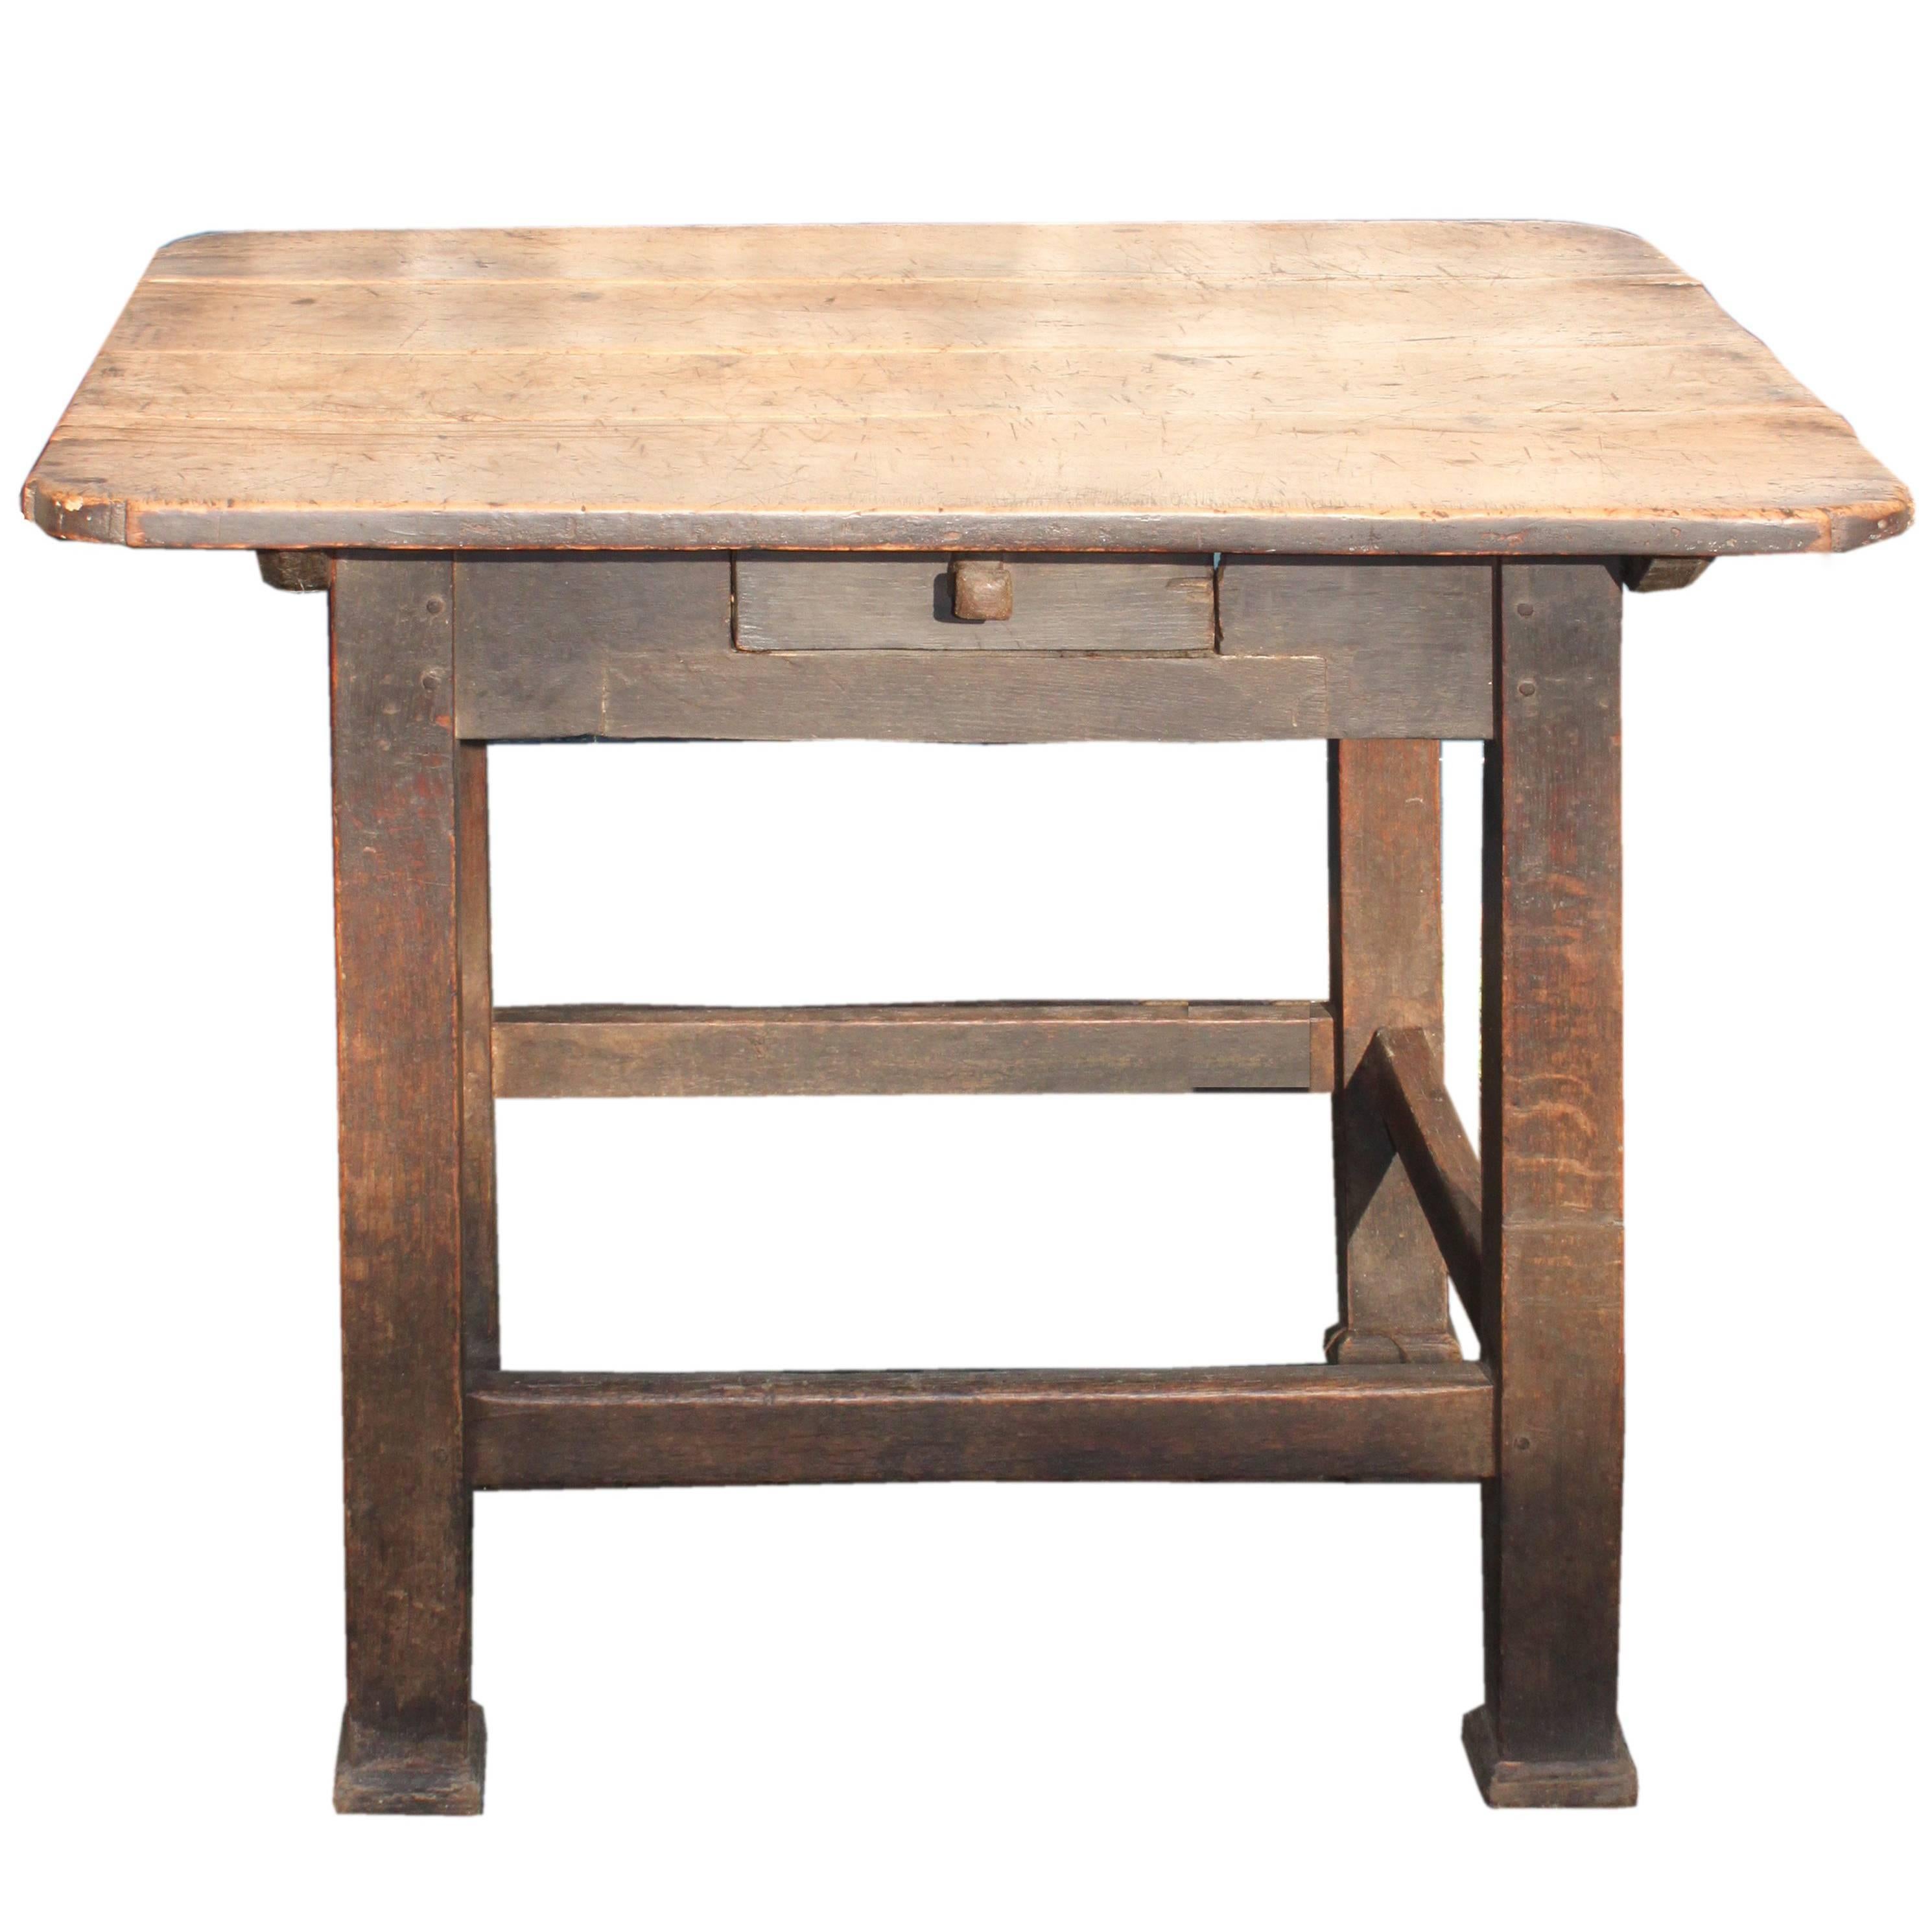 Primitive Fruitwood and Oak Table